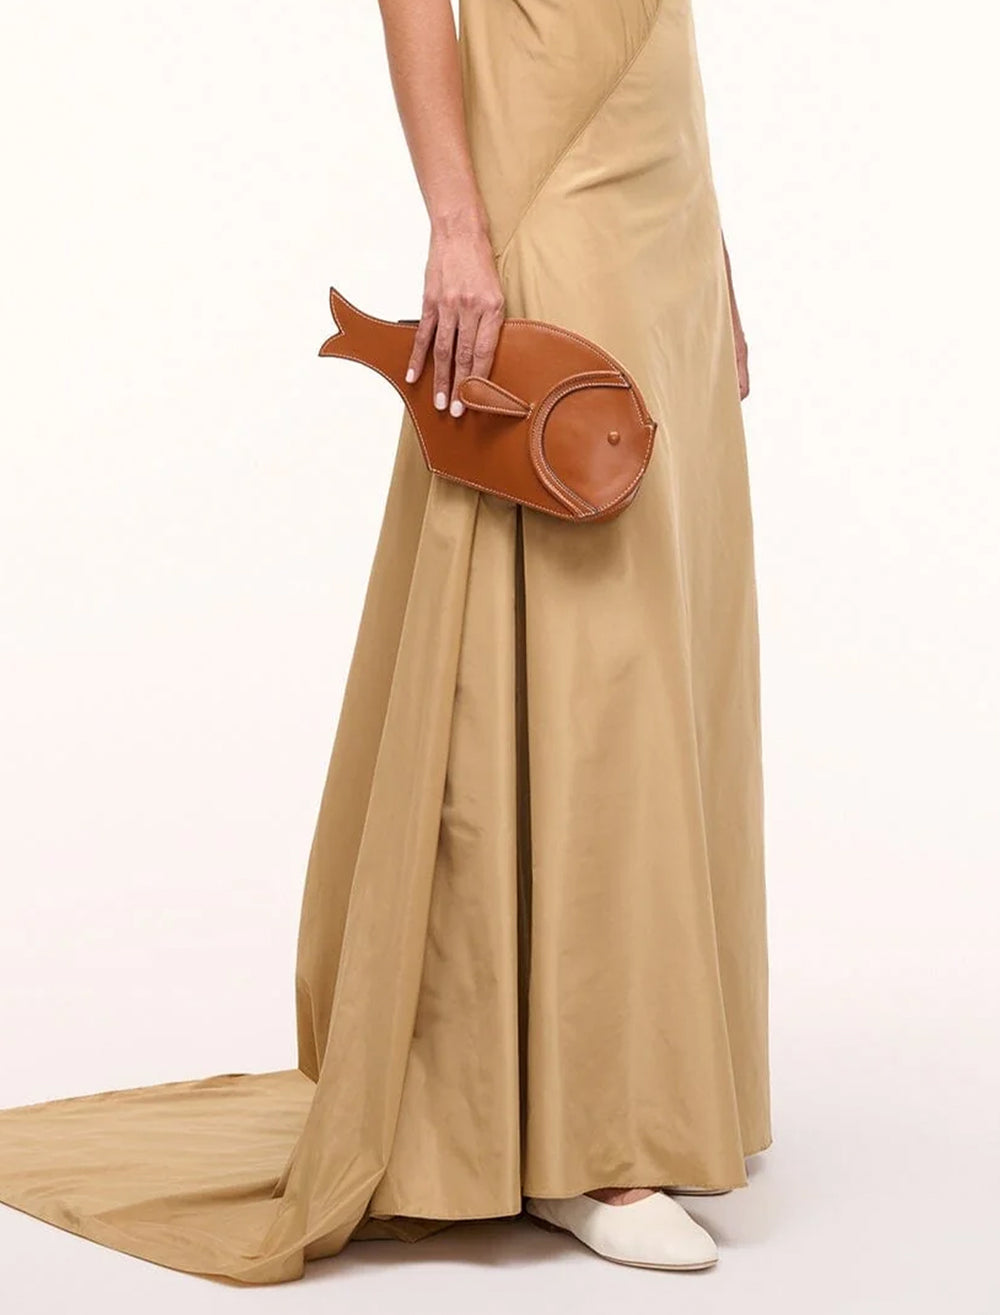 Model holding STAUD's pesce leather clutch in tan.